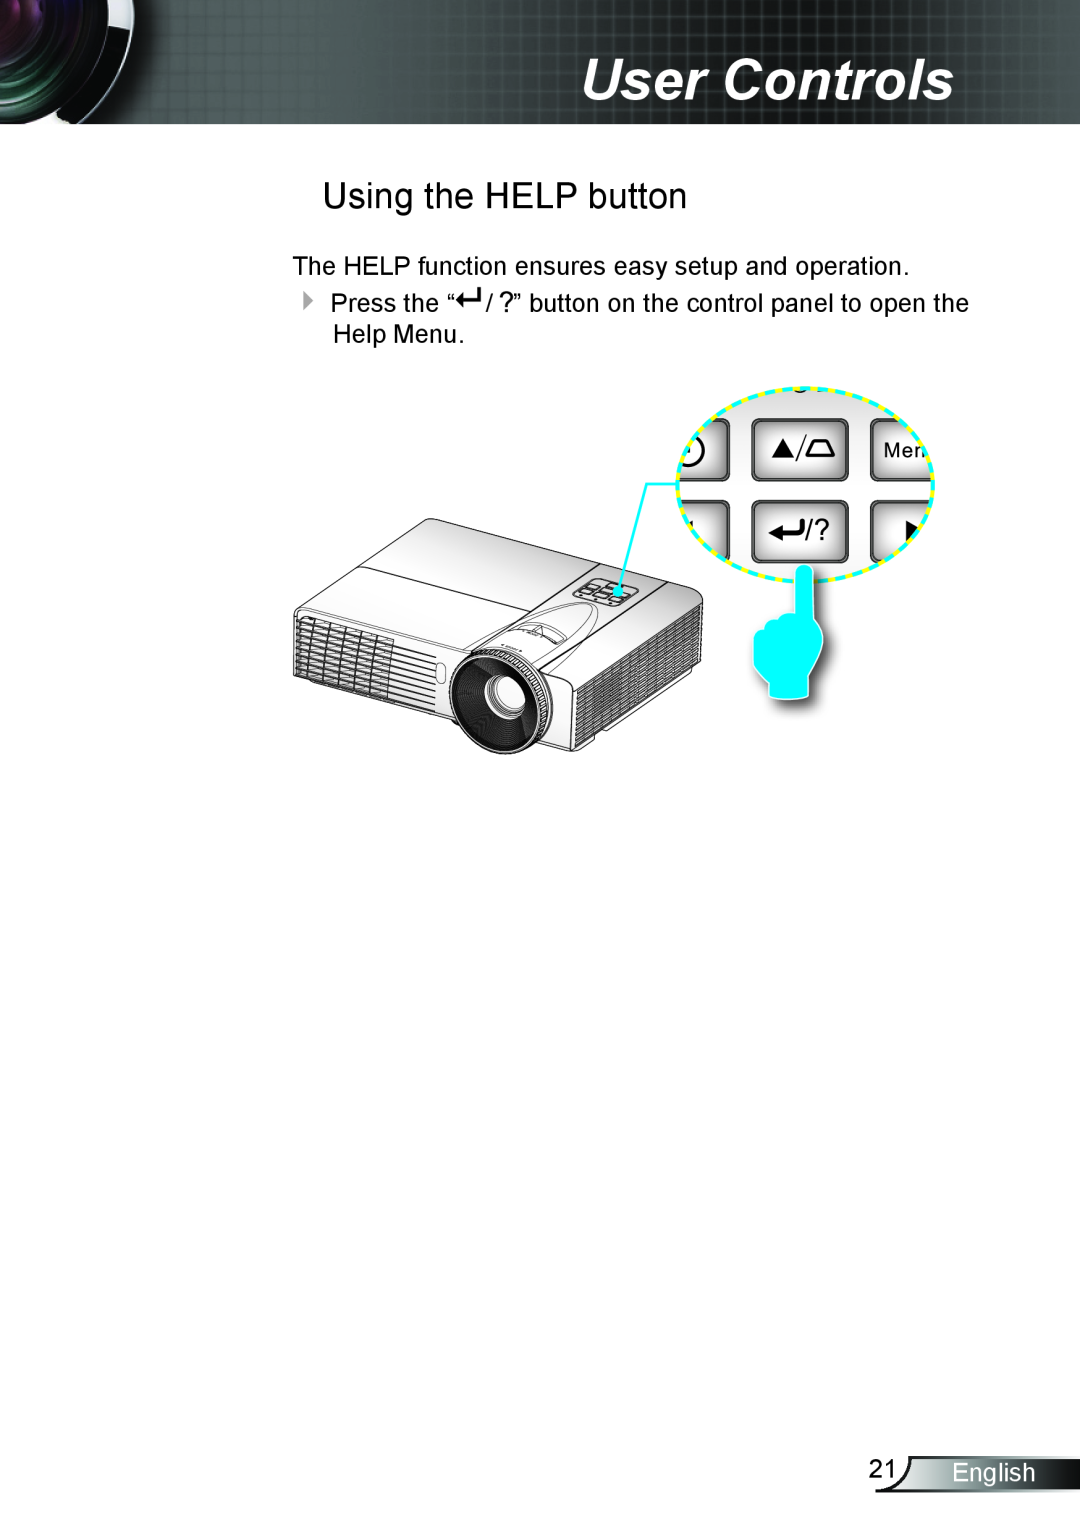 Optoma Technology TX6353D, TW6353D manual English, User Controls, Using the HELP button 